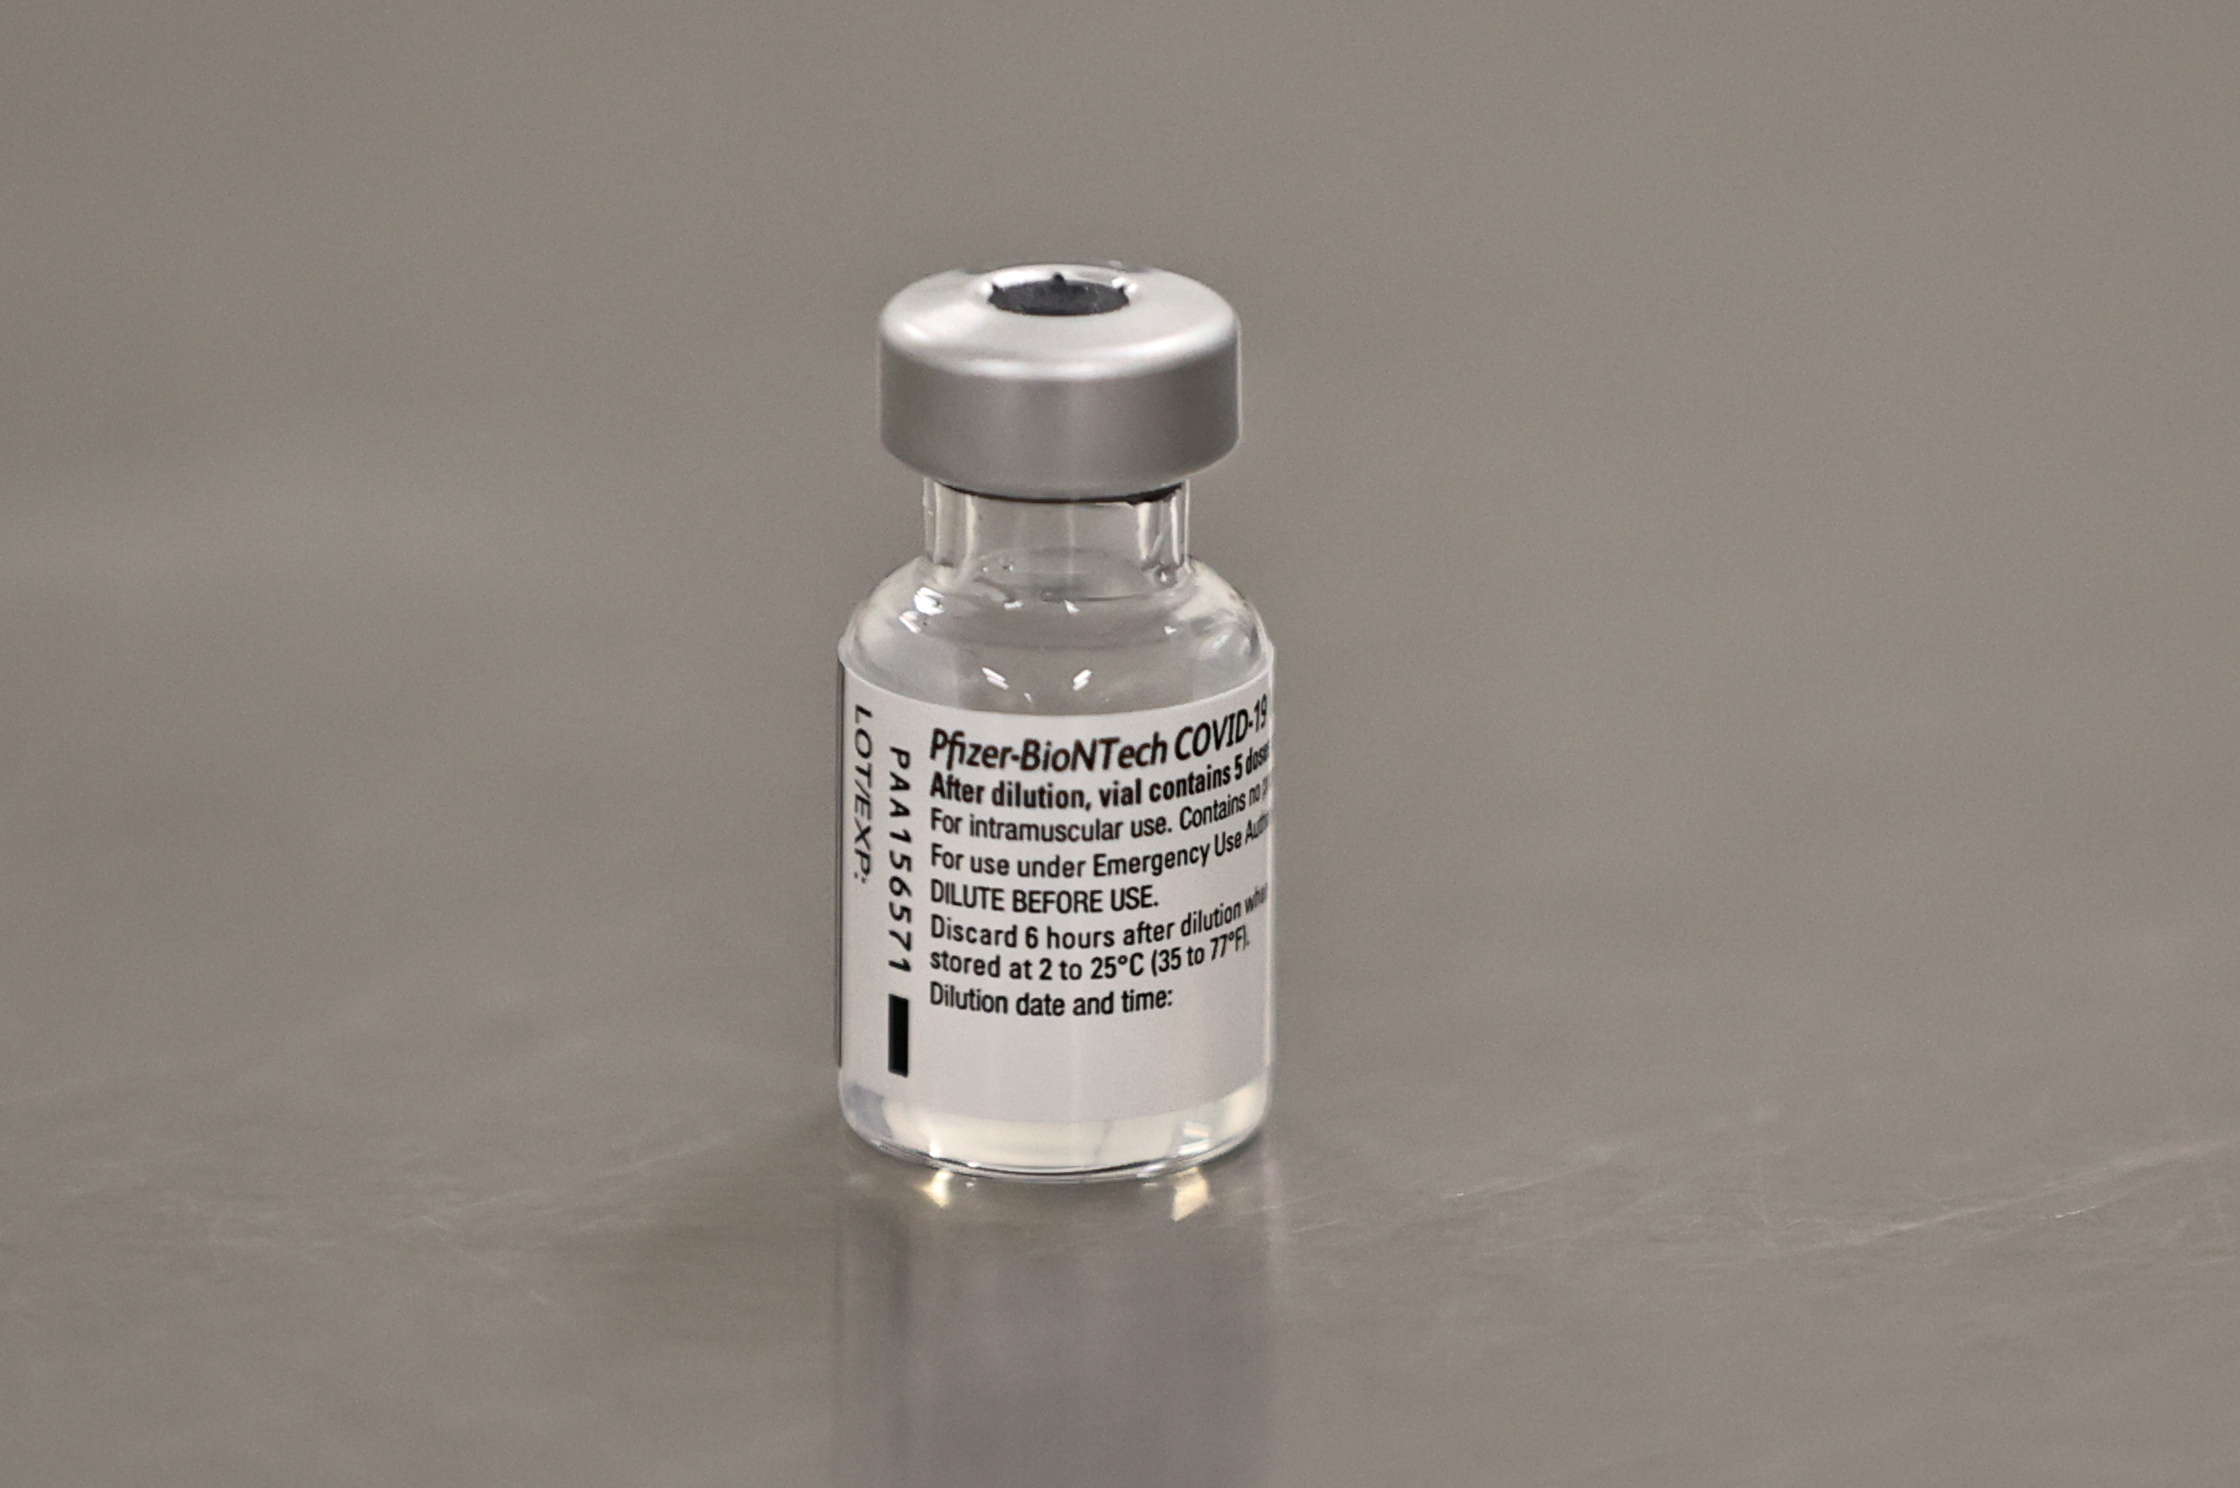 A phial of the Pfizer/BioNTech COVID-19 vaccine is seen ahead of being administered at the Royal Victoria Hospital in Belfast